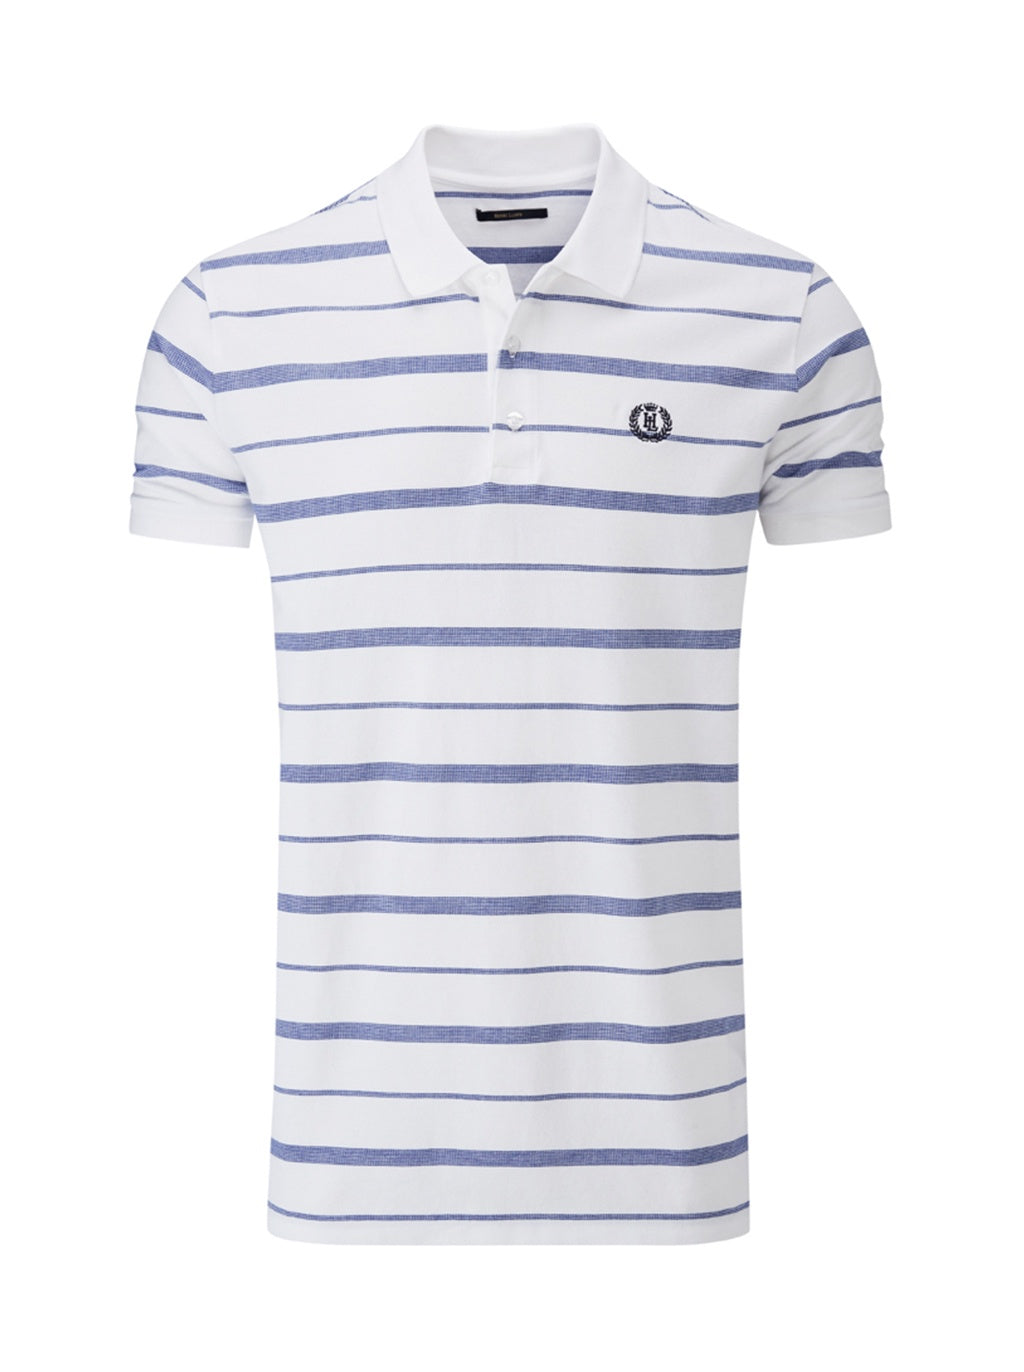 HENRI LLOYD SEASTRIPE POLO - AZB -  ONLY SIZE LARGE LEFT - DISCONTINUED STYLE -